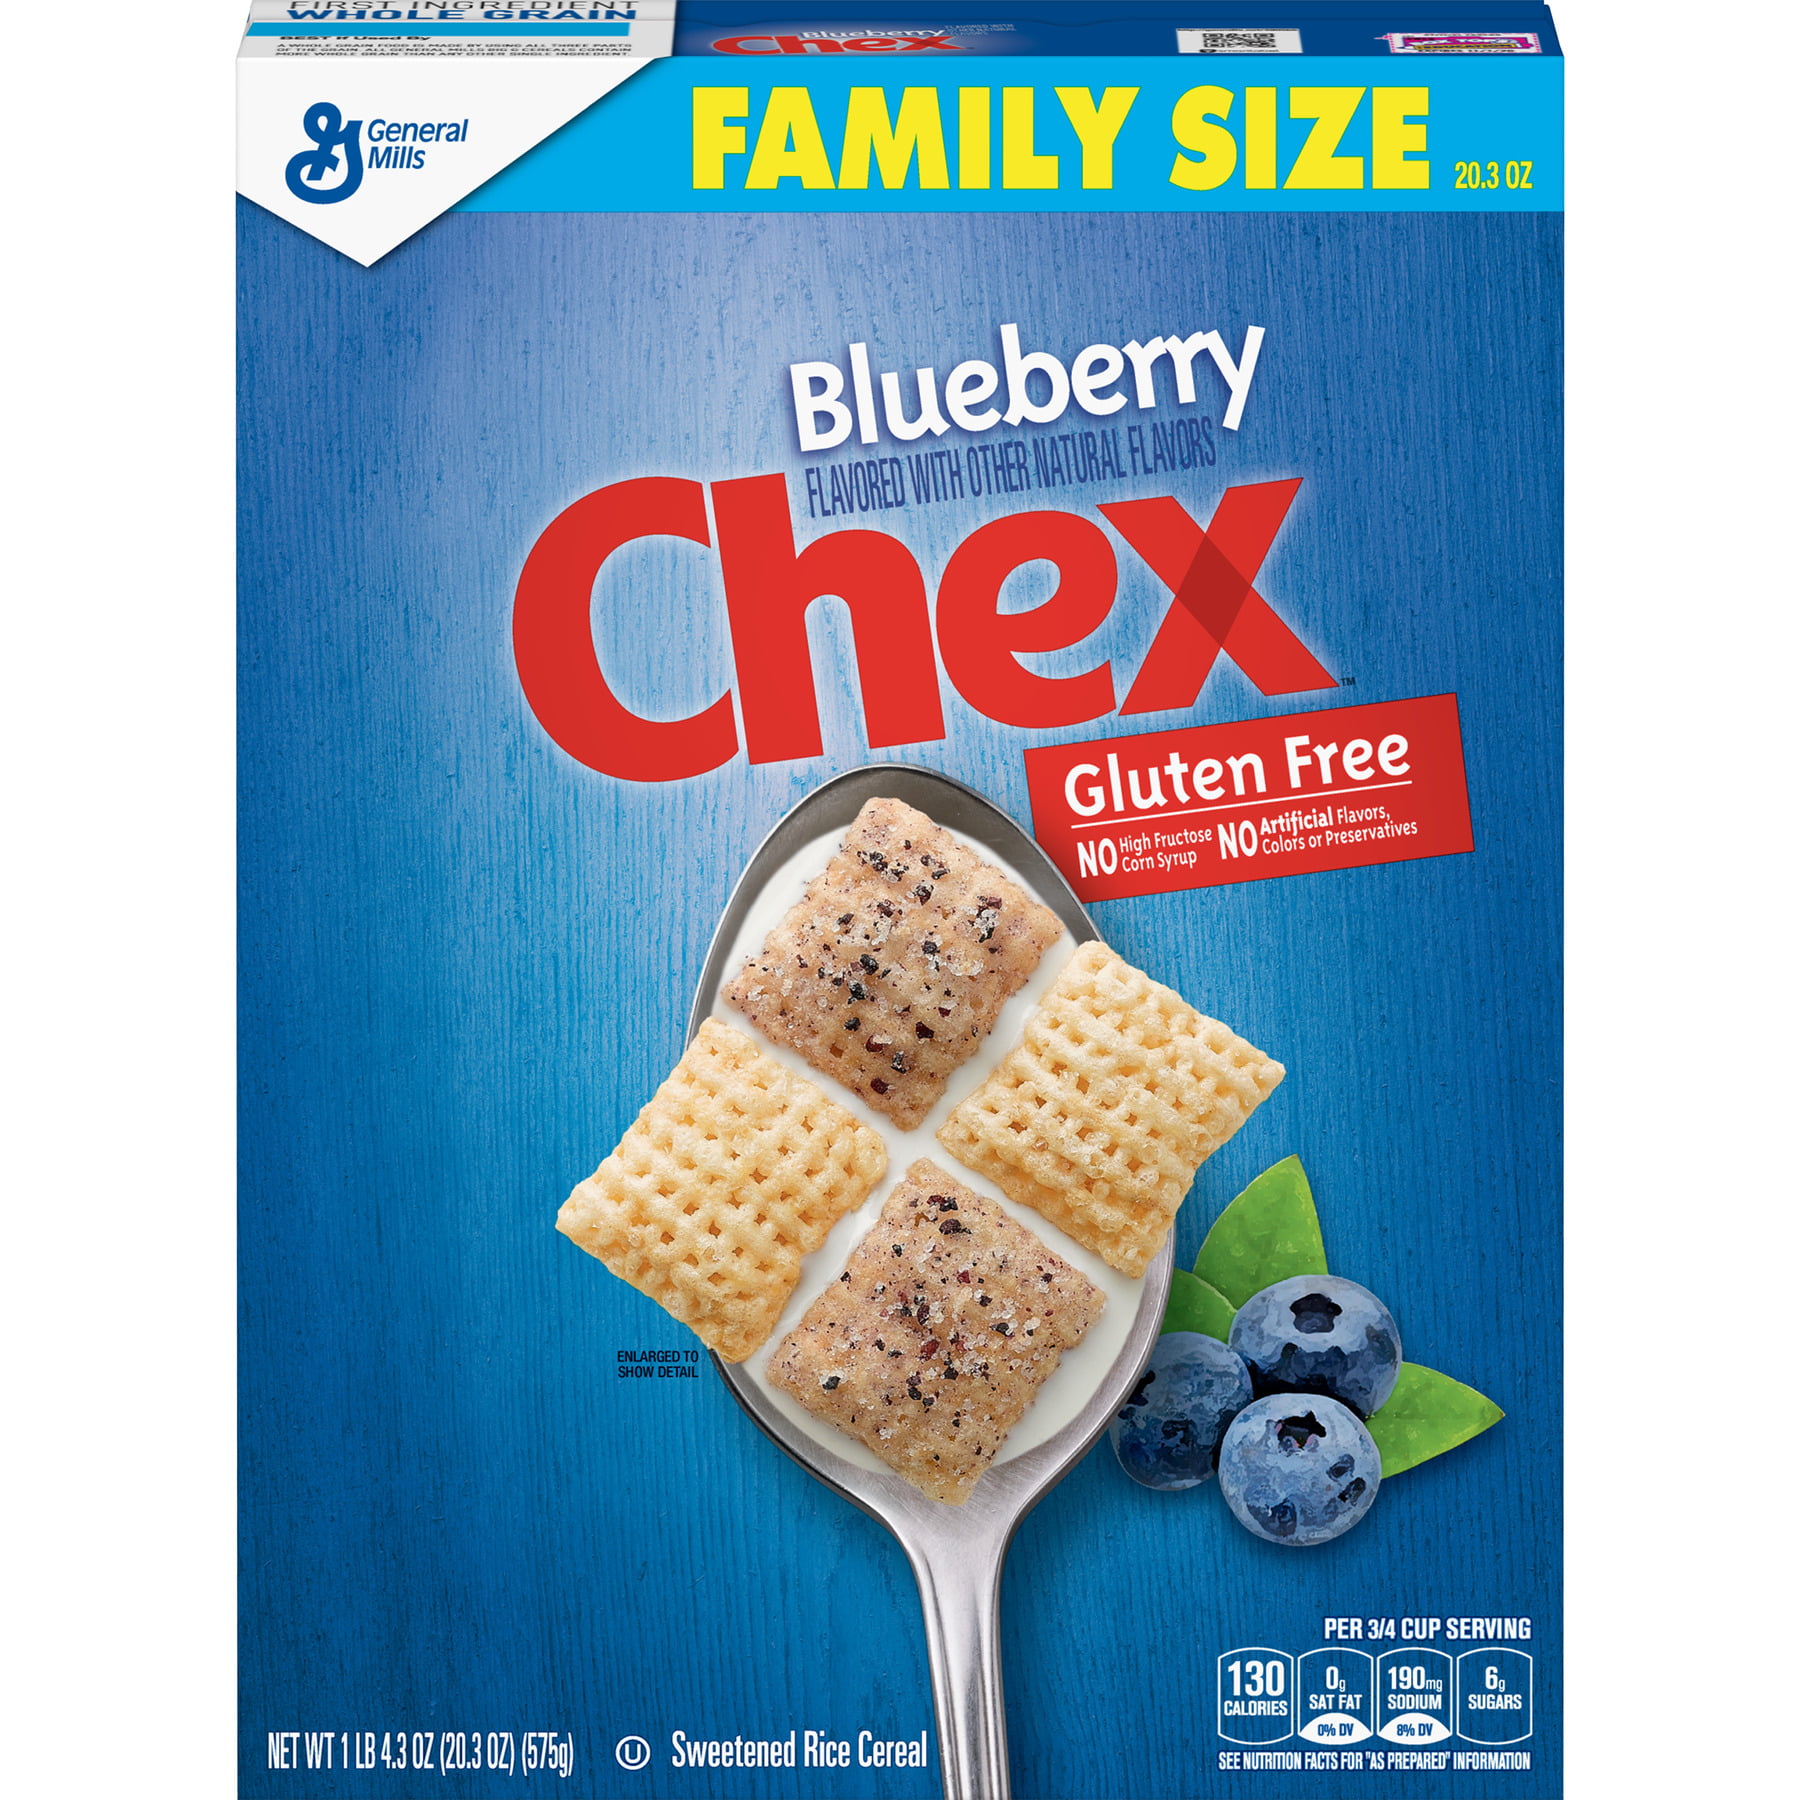 Blueberry Chex Cereal Gluten Free 20 3 Oz